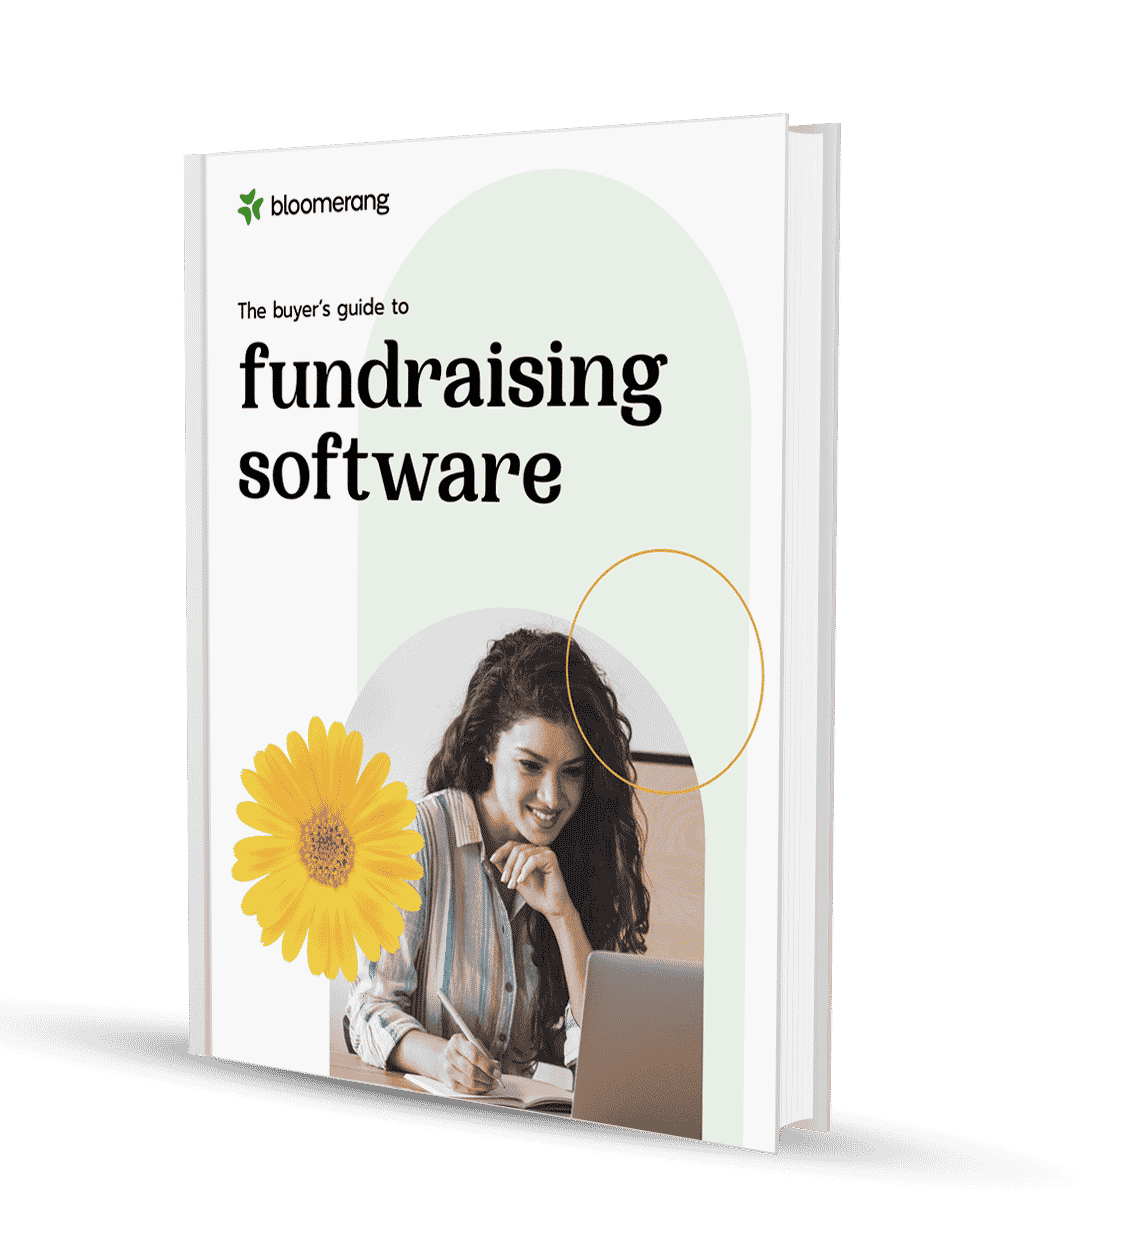 The Buyer's Guide to Fundraising Software will help your nonprofit decide which is the best software for your needs.